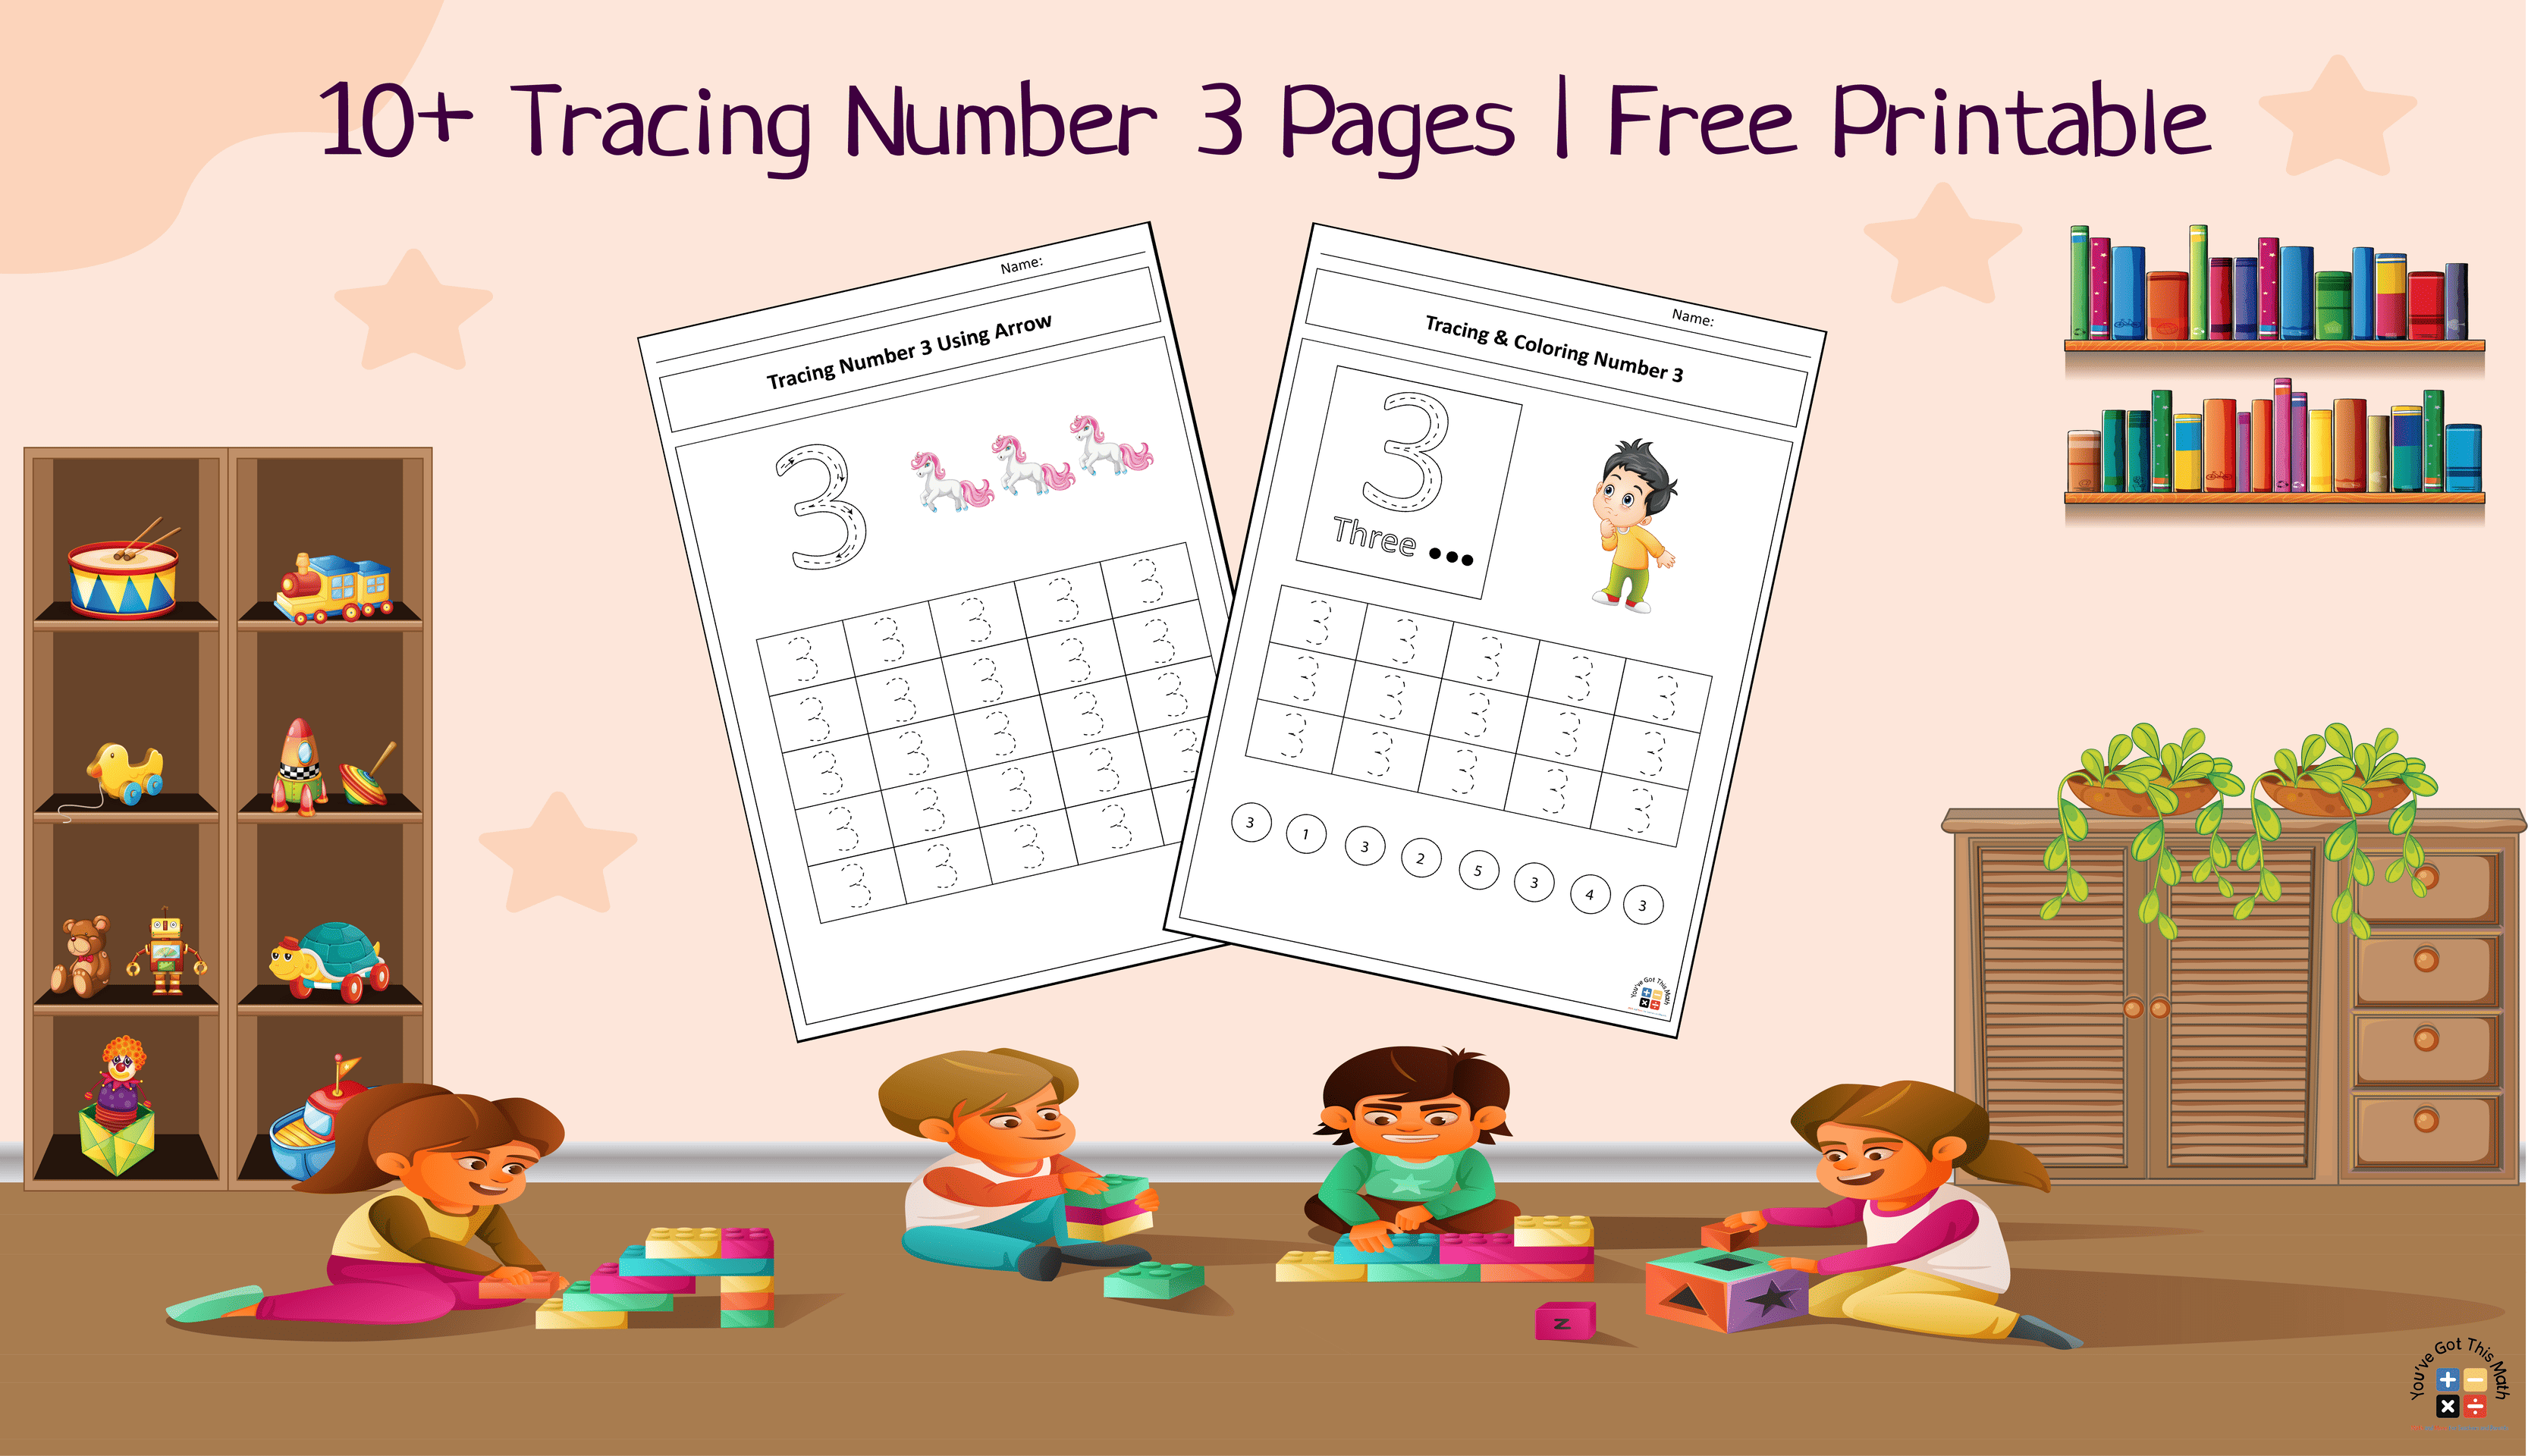 10+ Tracing Number 3 Pages | Free Printable